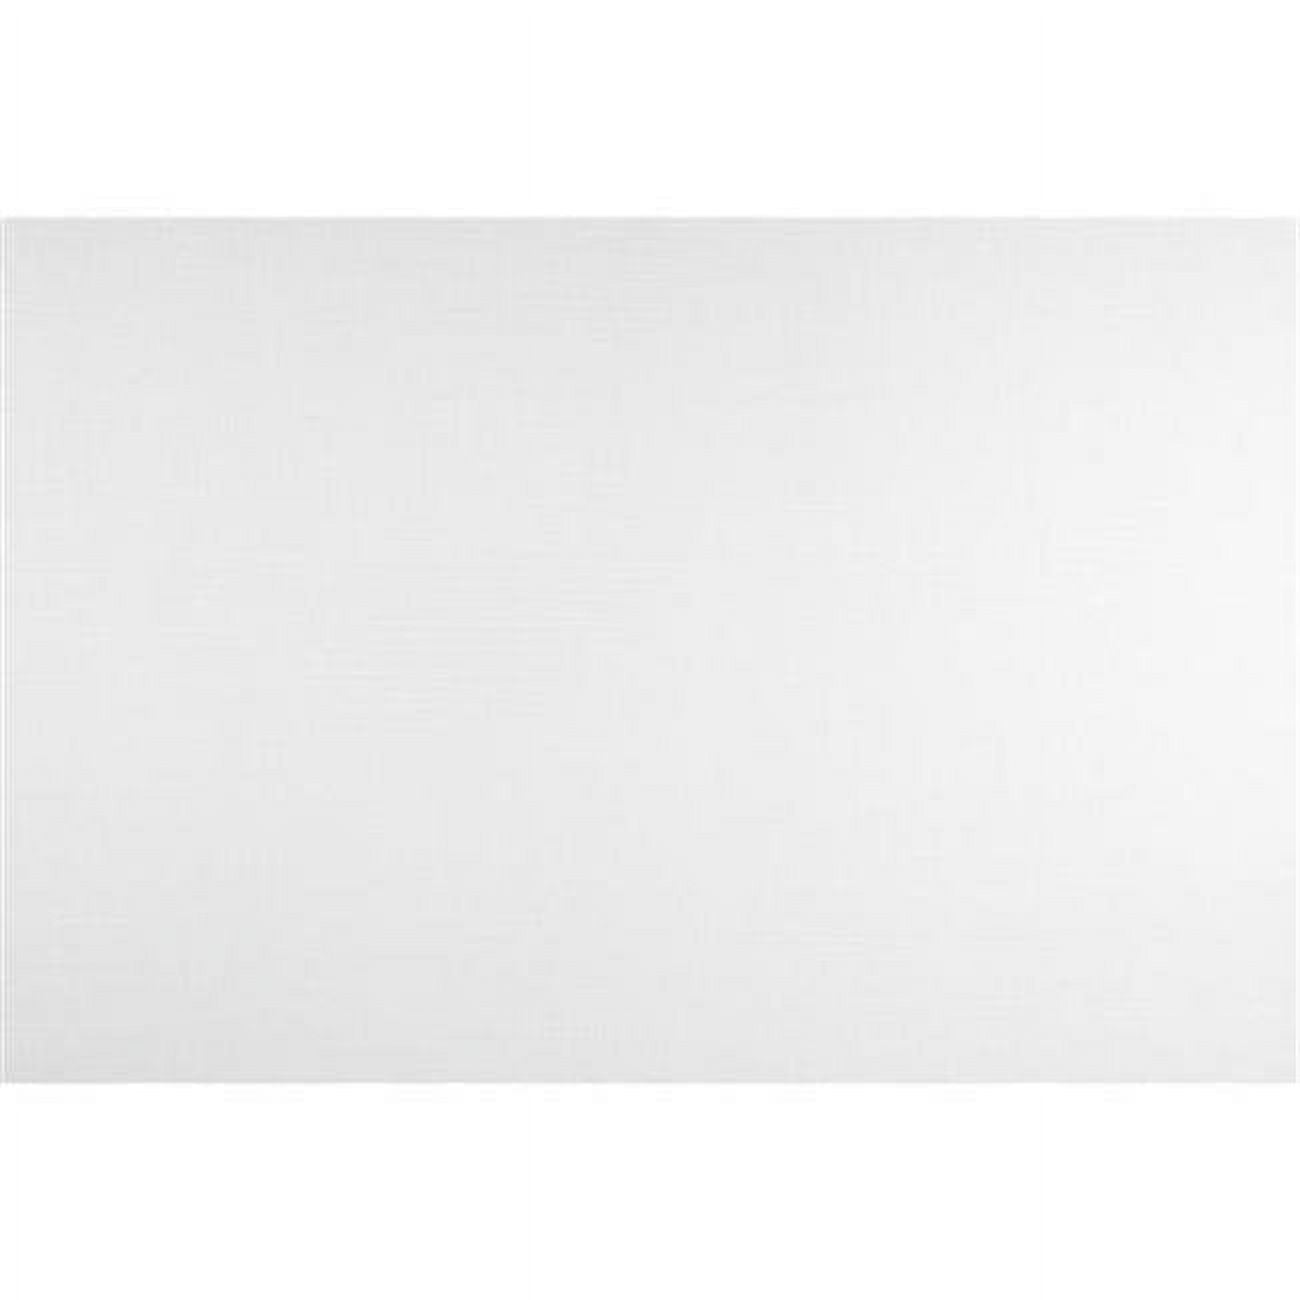 Picture of M-D Building Products 5020322 48 in. x 25 ft. Aluminum Screen for Rust Protection, Charcoal - Pack of 4